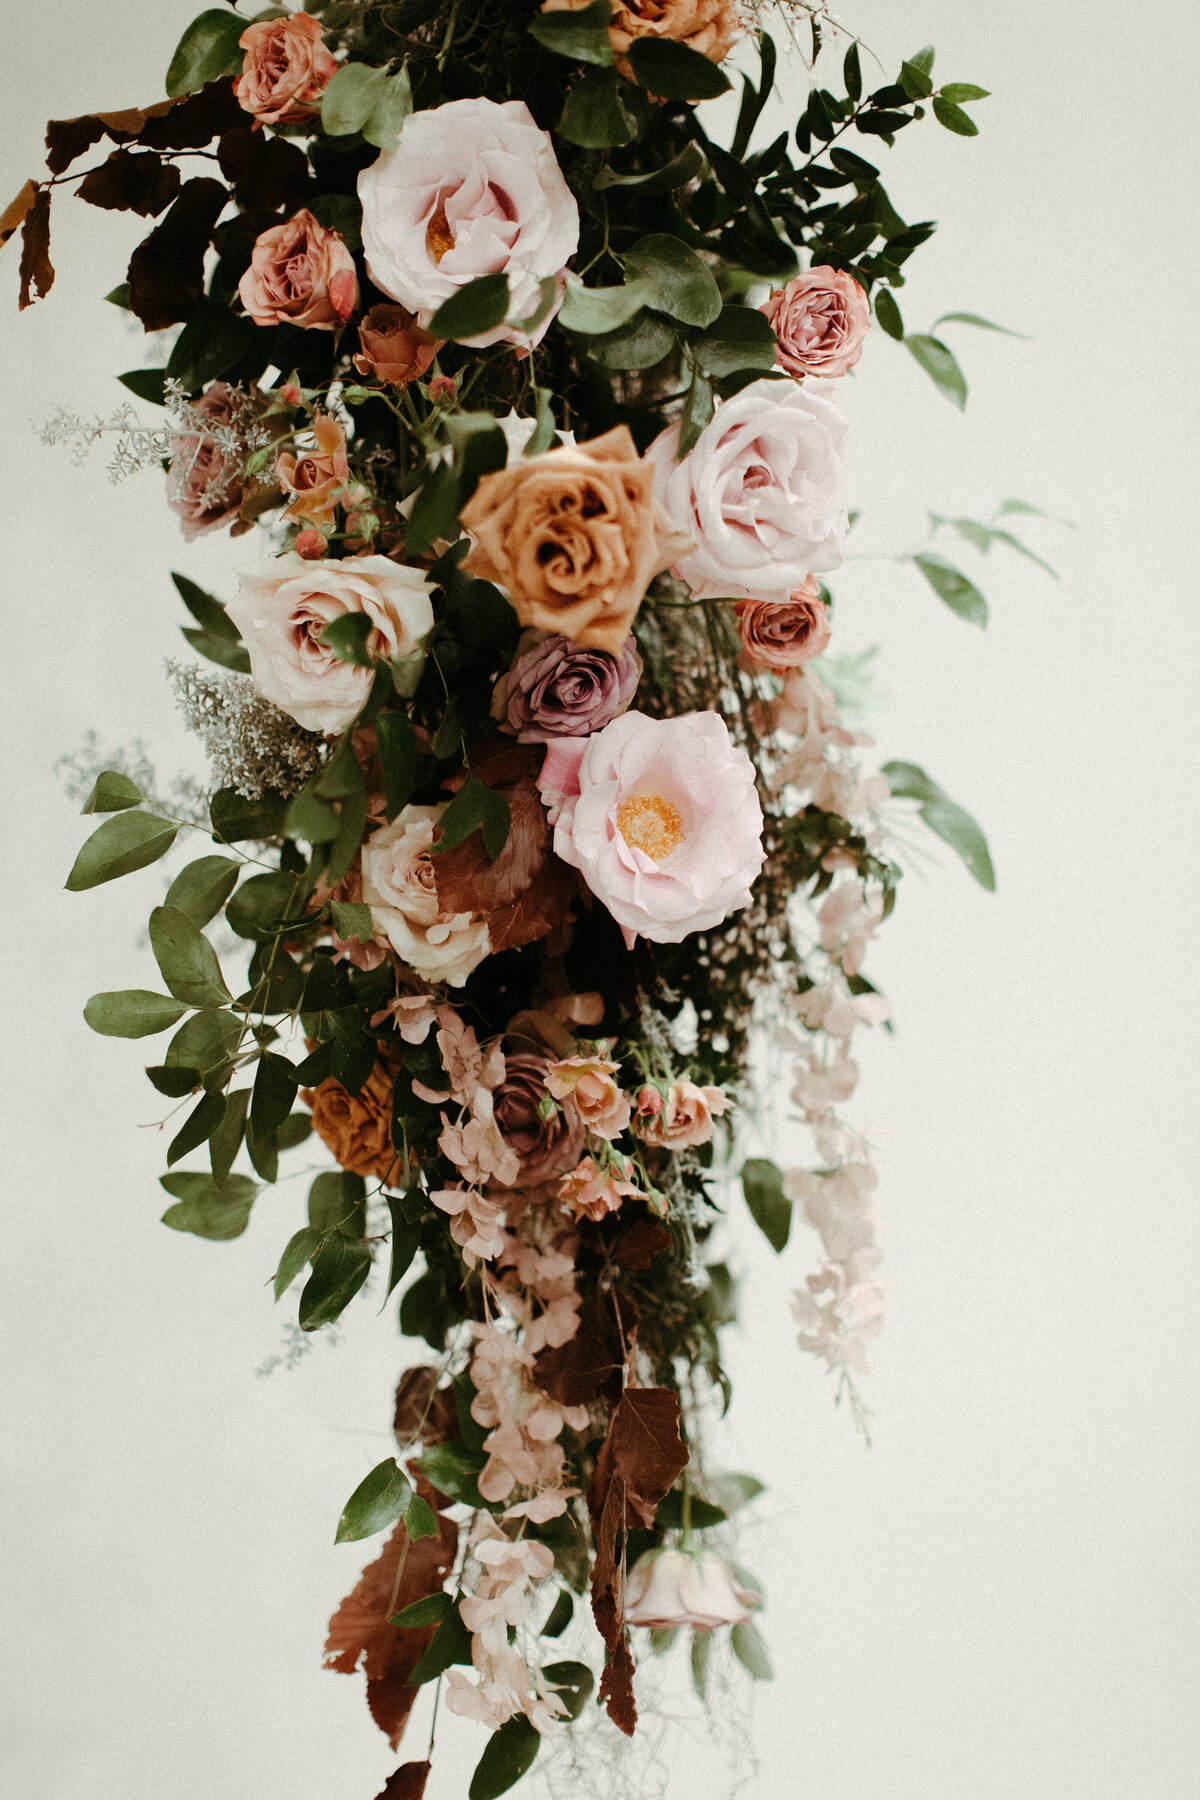 An eye-catching whimsical installation full of petal heavy roses and copper beech was the highlight of this art deco wedding. Terra cotta, burgundy, dusty pink, and other neutral florals warm up this ceremony. Designed by Rosemary and Finch in Nashville, TN.An eye-catching whimsical installation full of petal heavy roses and copper beech was the highlight of this art deco wedding. Terra cotta, burgundy, dusty pink, and other neutral florals warm up this ceremony. Designed by Rosemary and Finch in Nashville, TN.